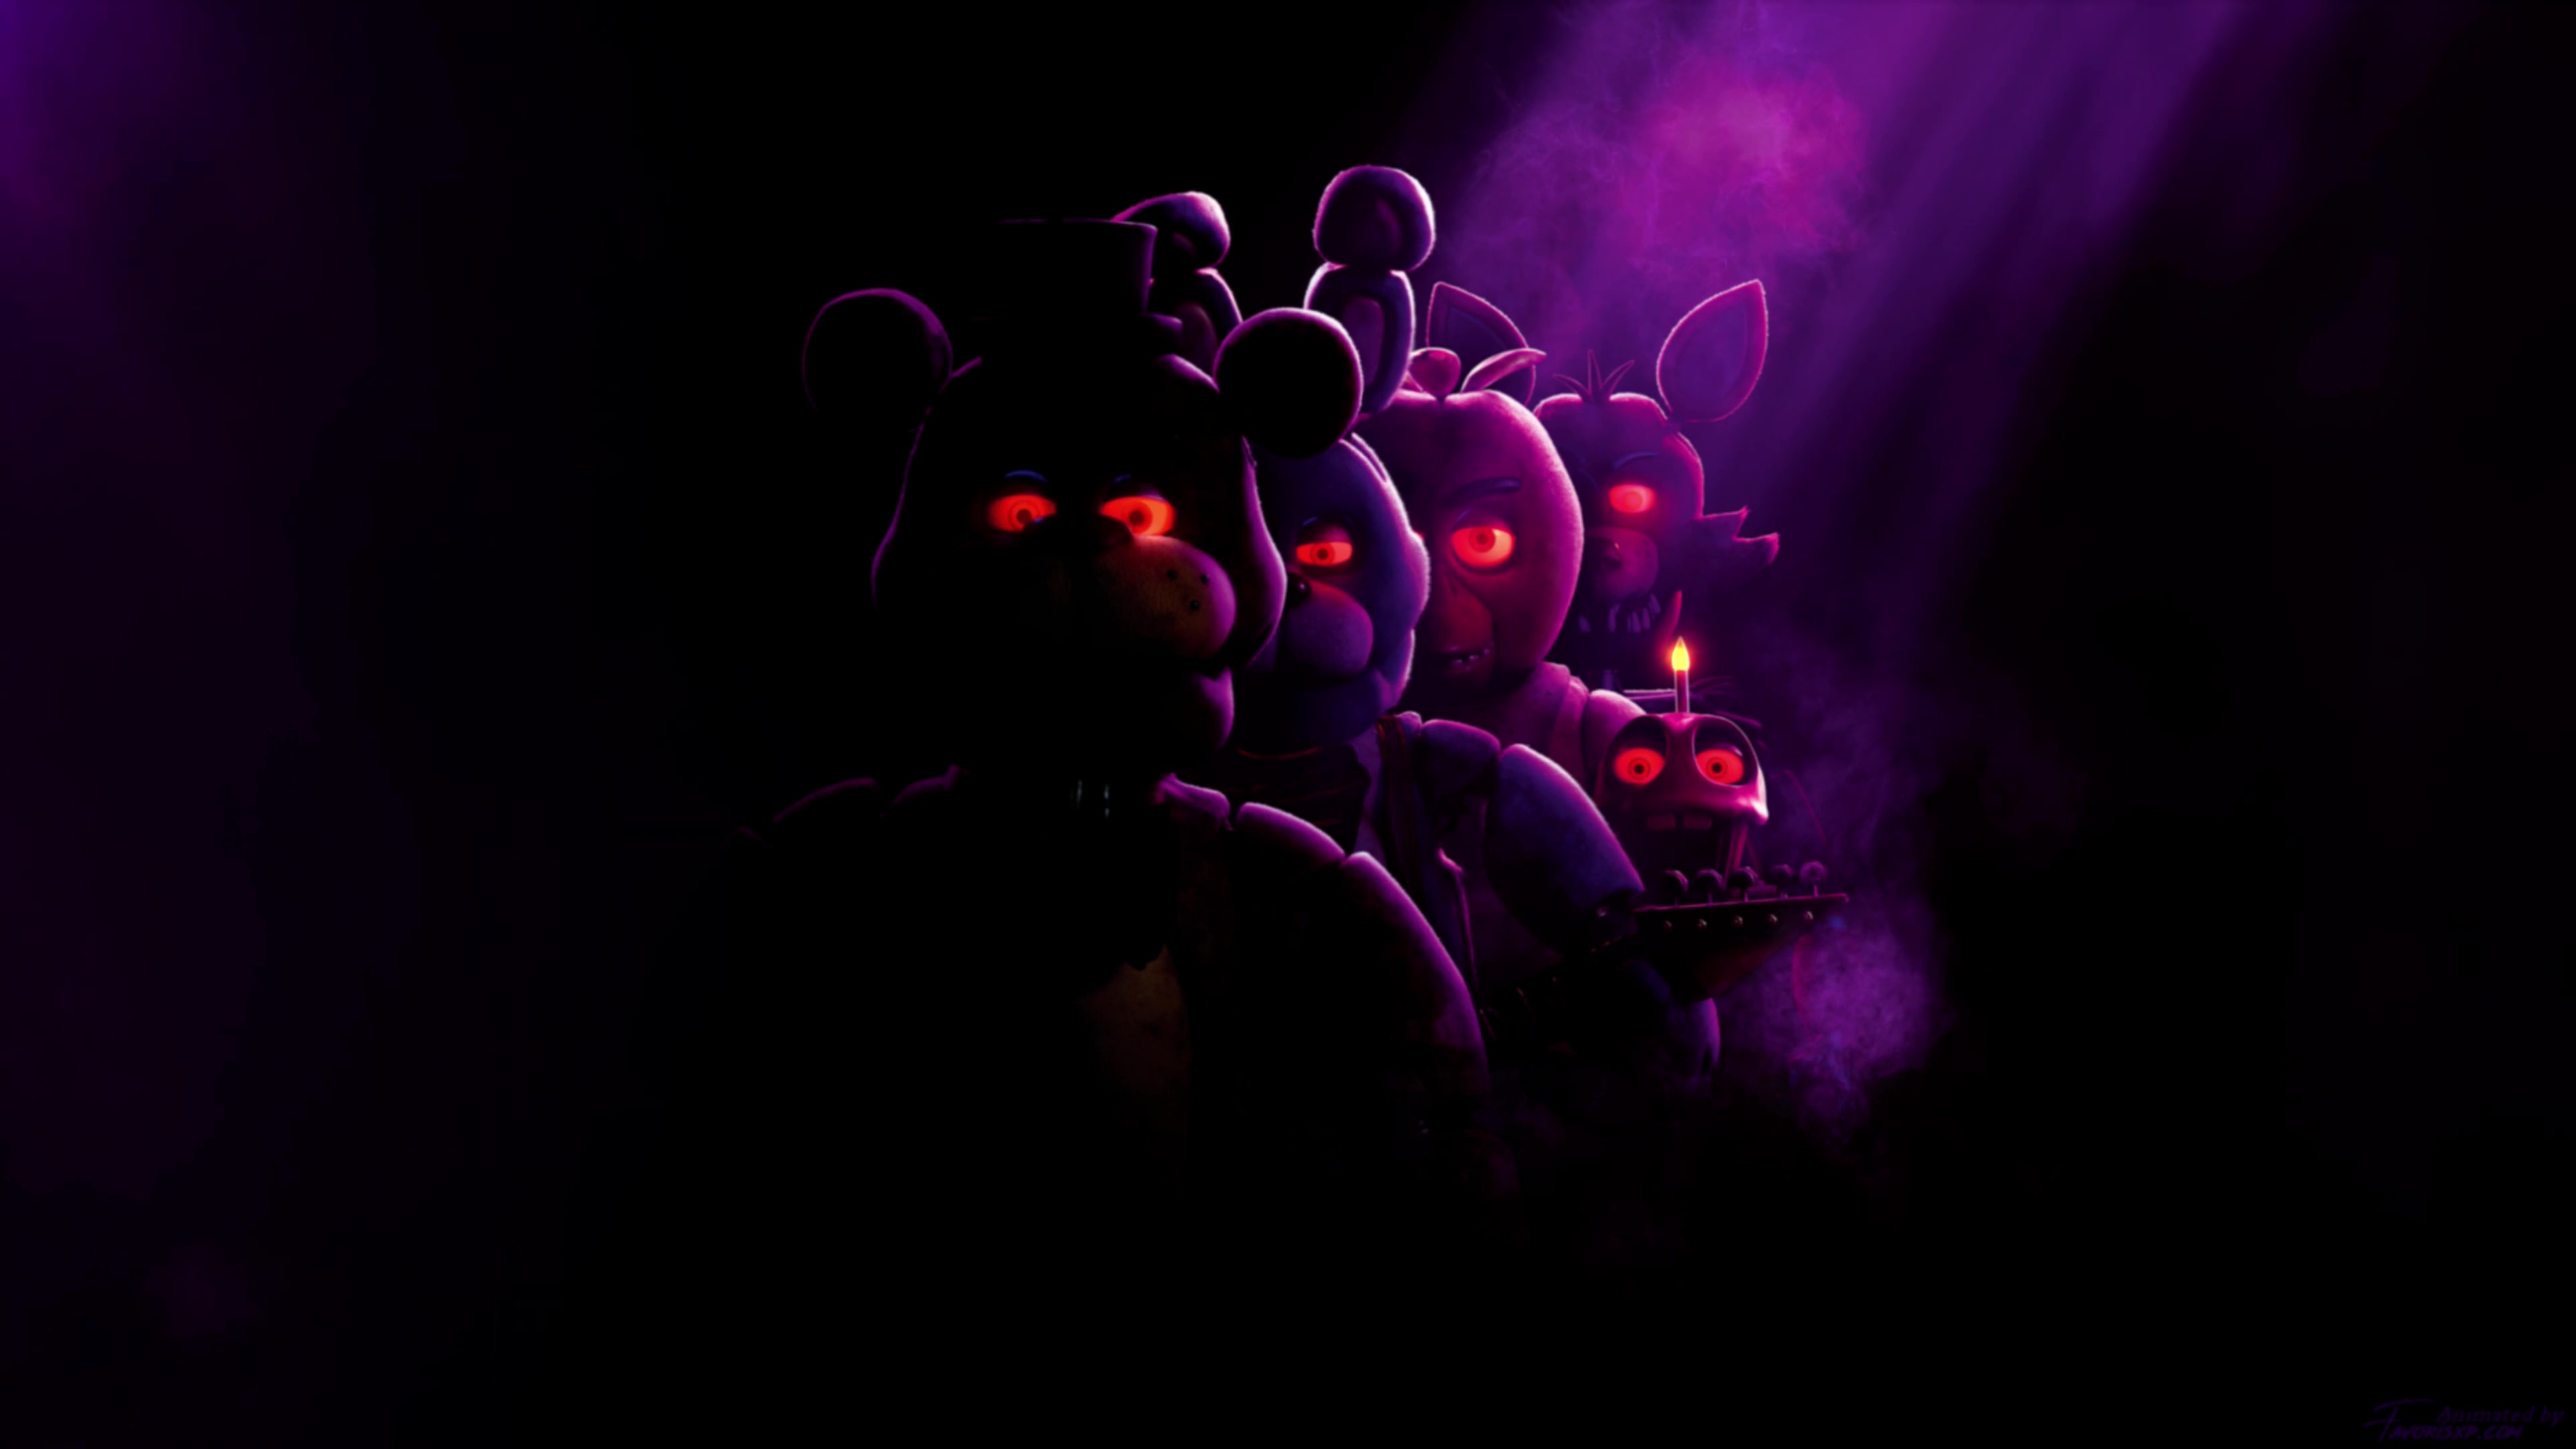 Five Nights At Freddy S Free Download Background, Nights Of Freddy Pictures  Background Image And Wallpaper for Free Download